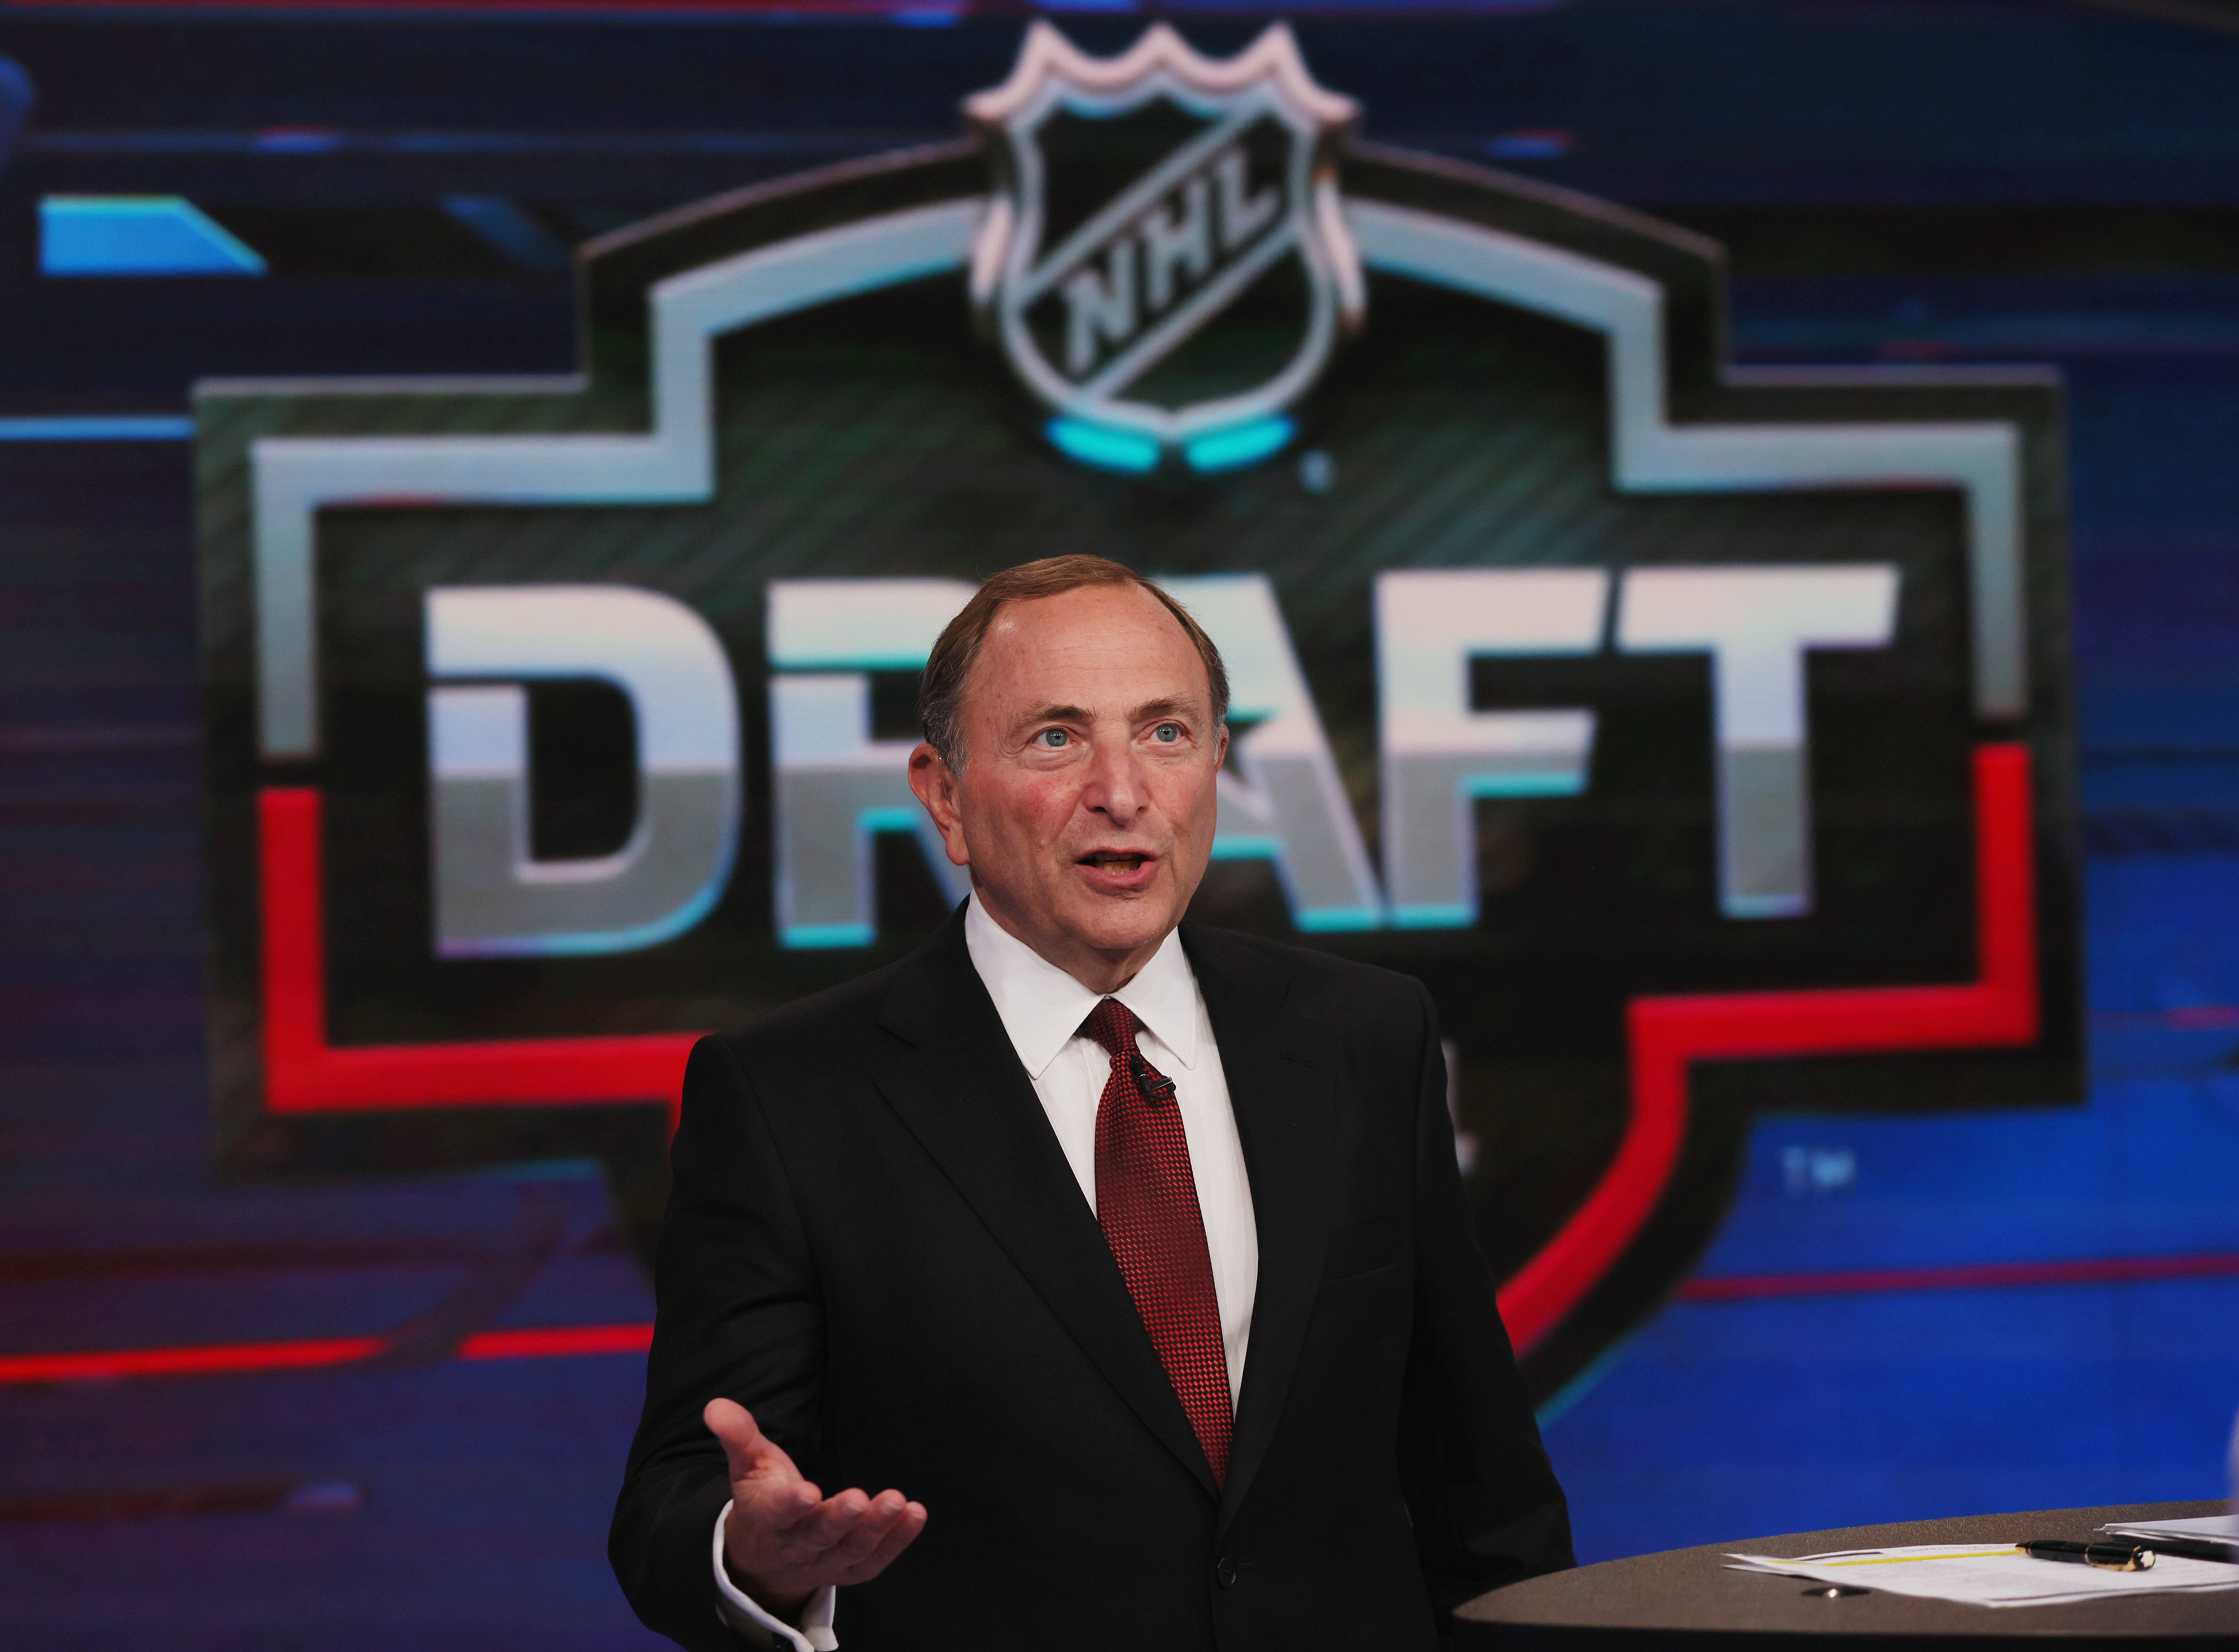 NHL boss Gary Bettman said the Olympics are not feasible due to the Omicron variant